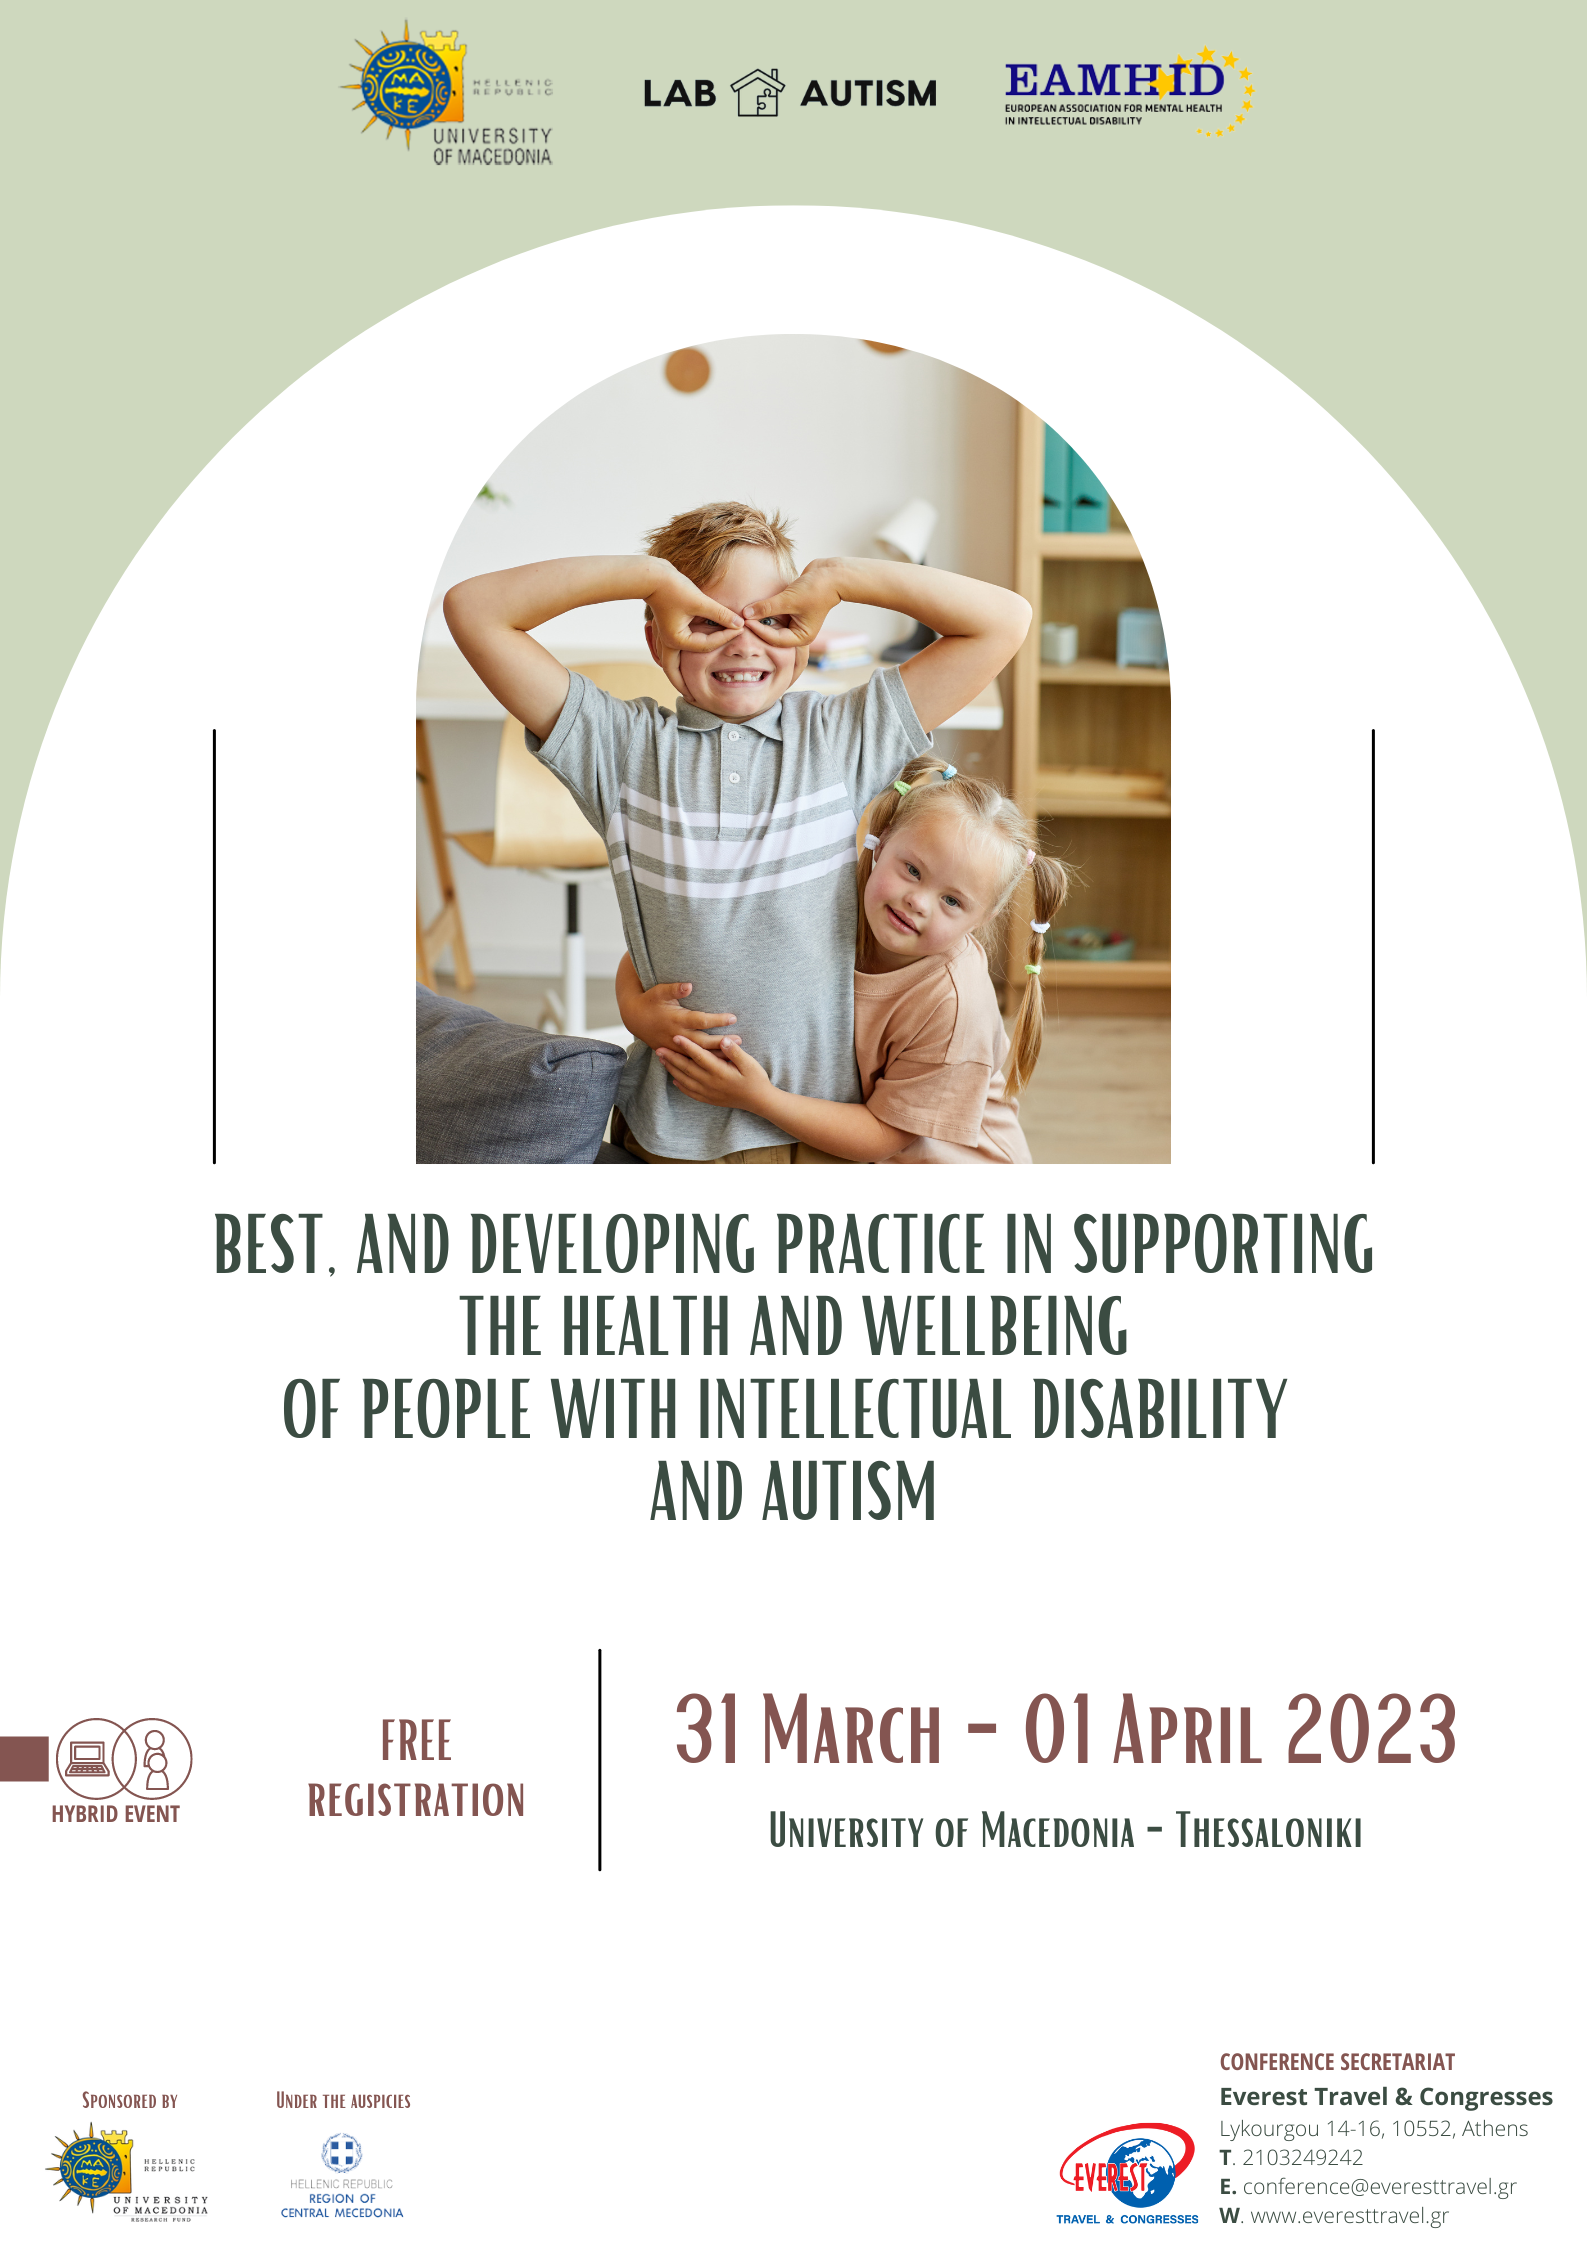 Best, and developing practice in supporting the health and wellbeing of people with intellectual disability and autism